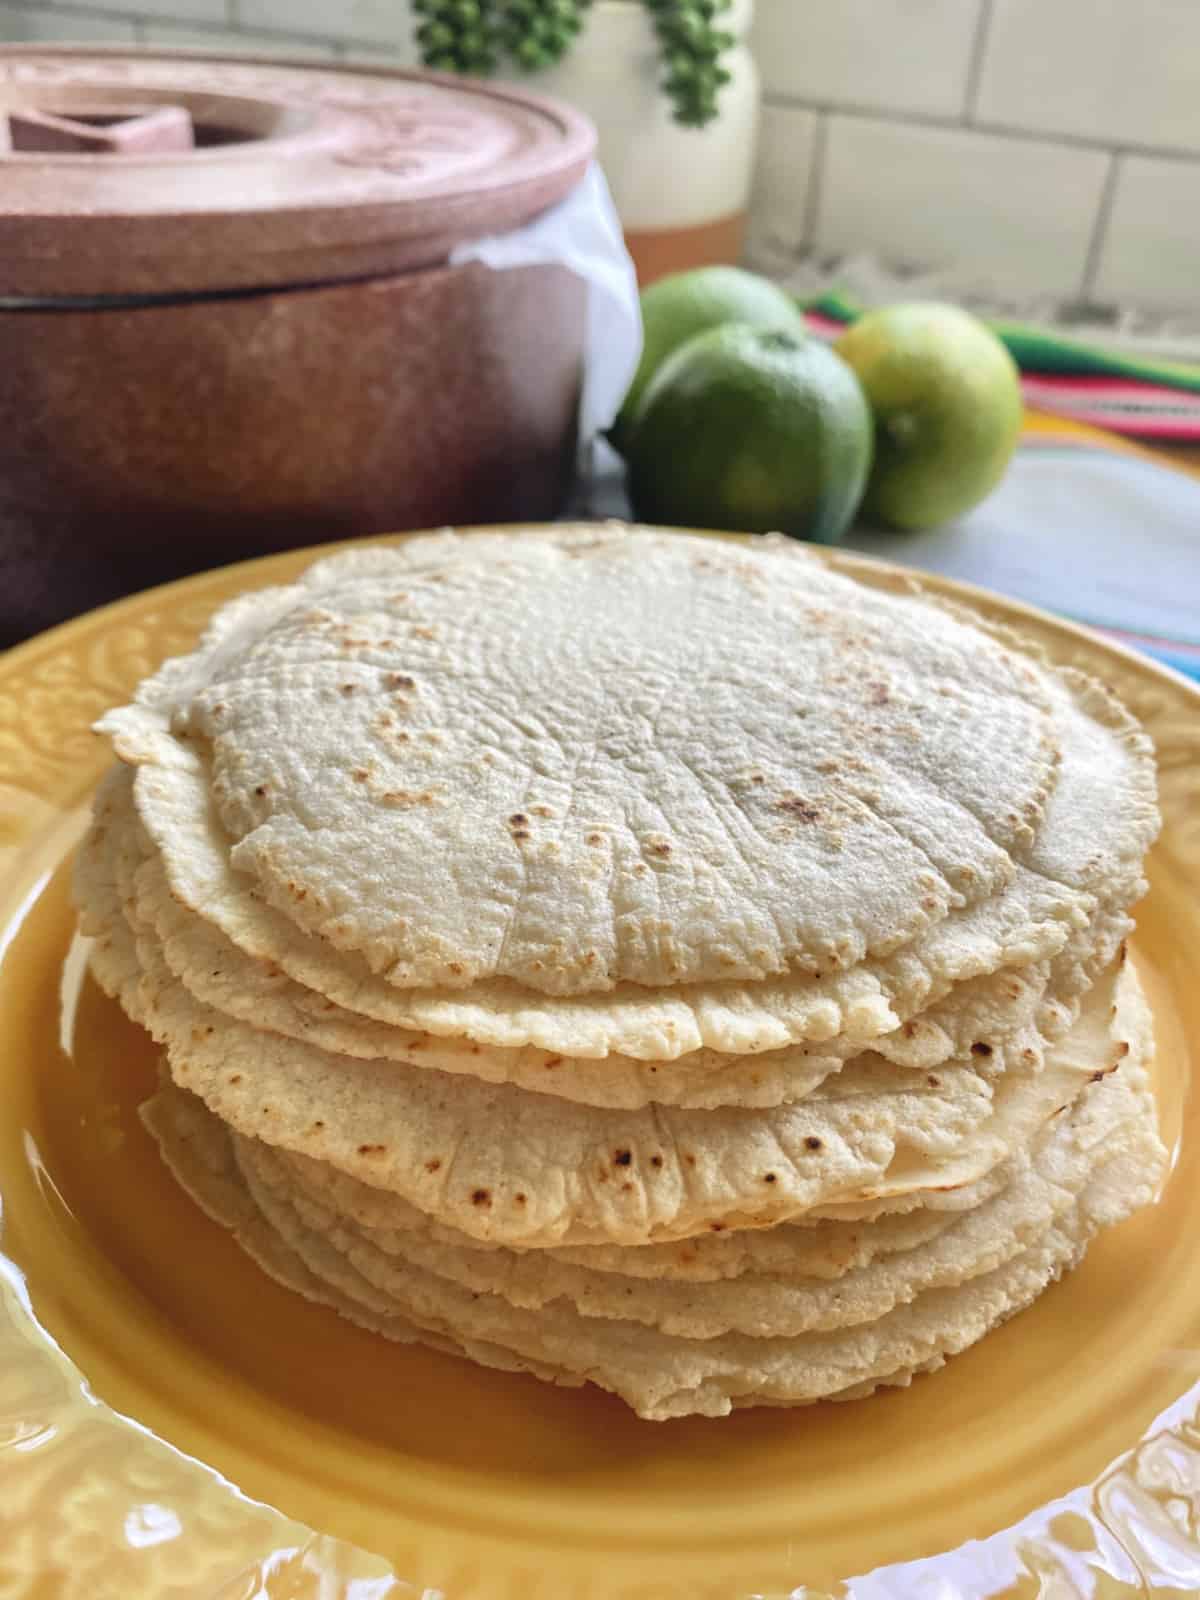 Stack of corn tortillas on a yellow plate with a brown tortilla warmer in the background.